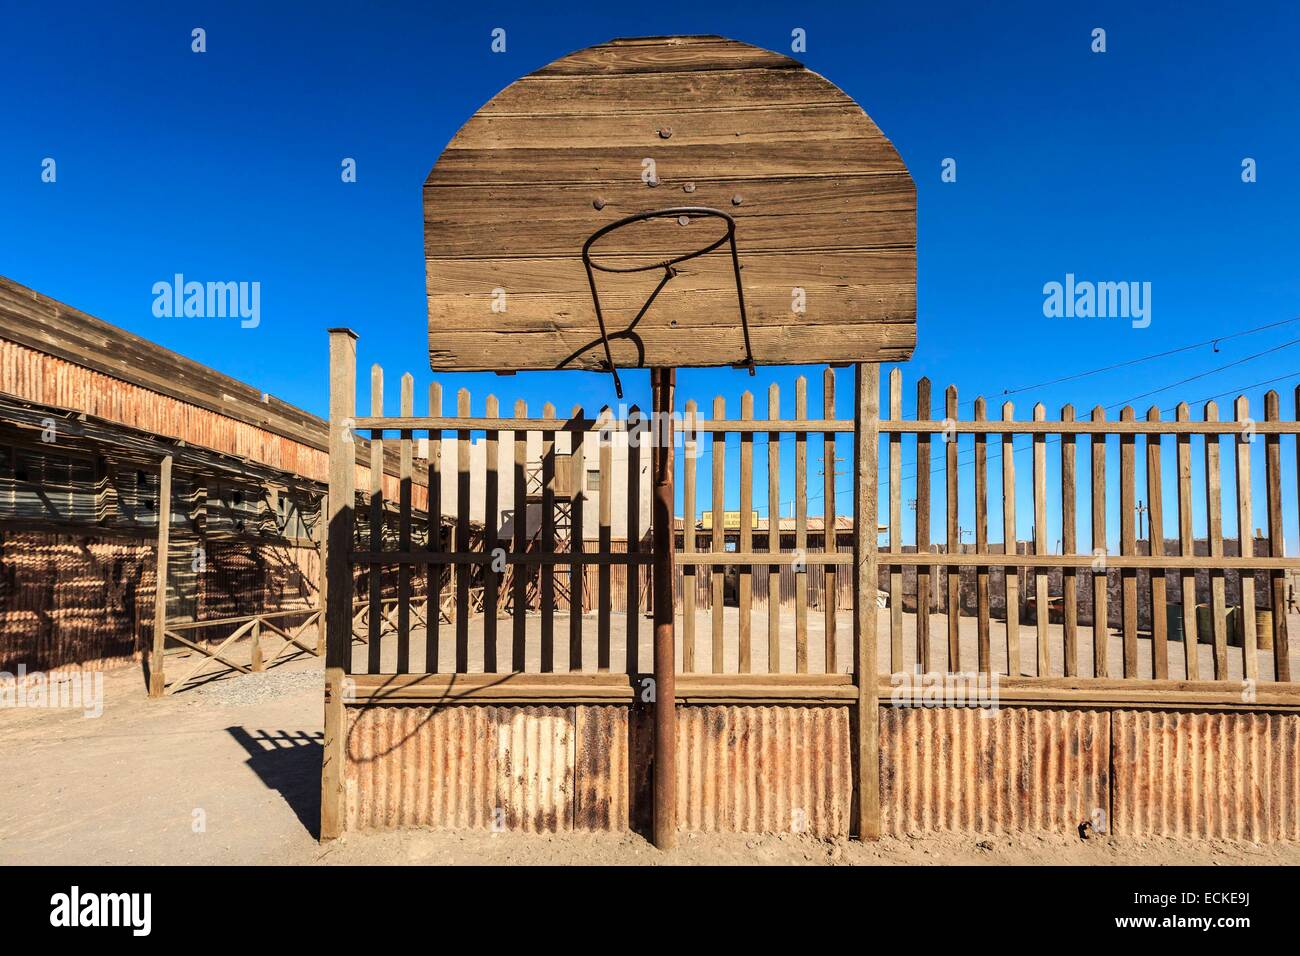 Chile, El Norte Grande, Tarapaca Region, Iquique, Humberstone and Santa Laura Saltpeter Works, listed as World Heritage by UNESCO, basketball hoop Stock Photo